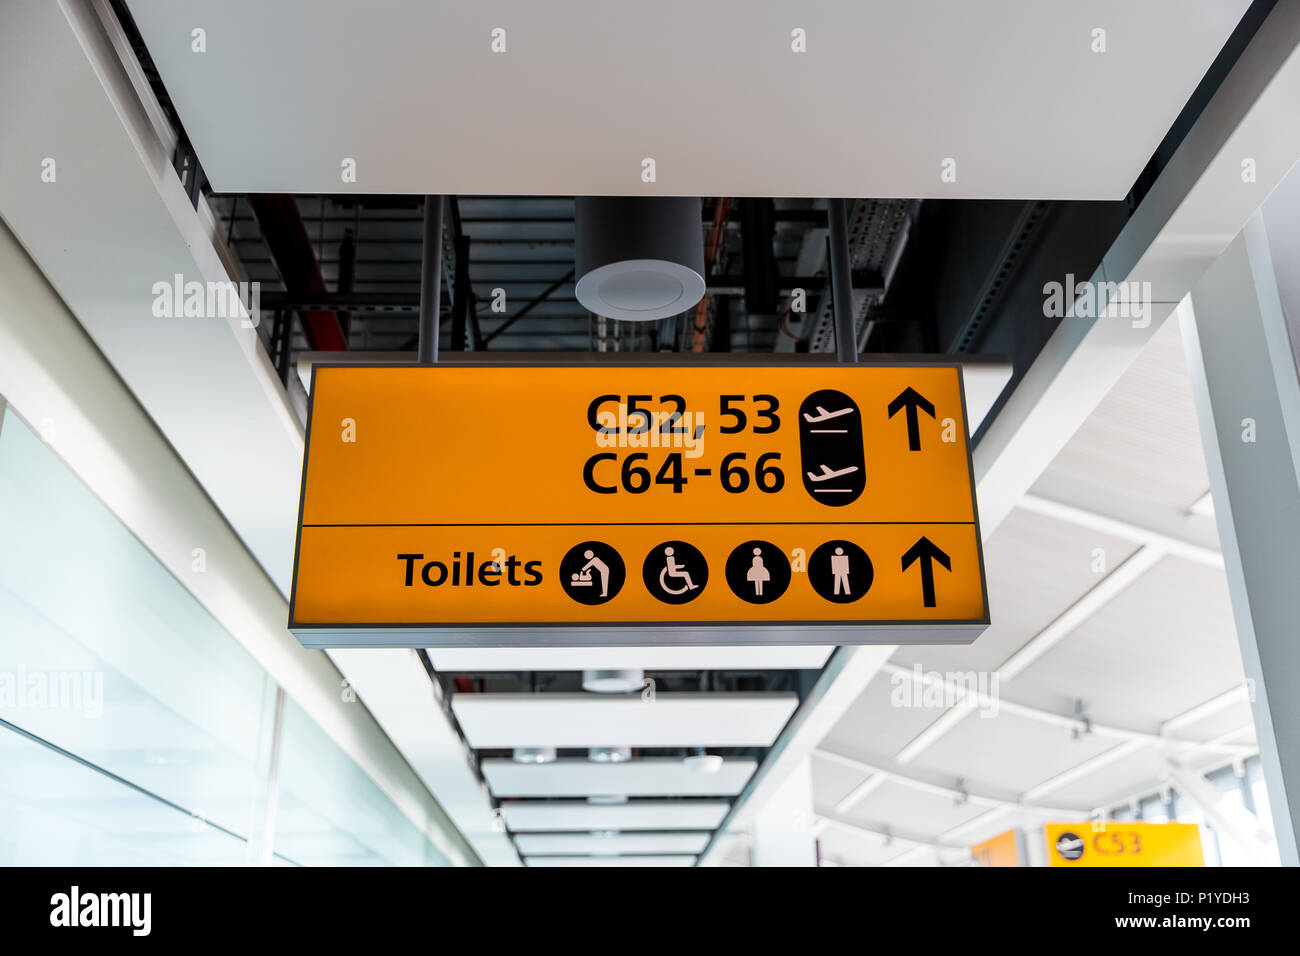 LONDON - MAY 27, 2018: Departures sign at London Heathrow airport Stock Photo